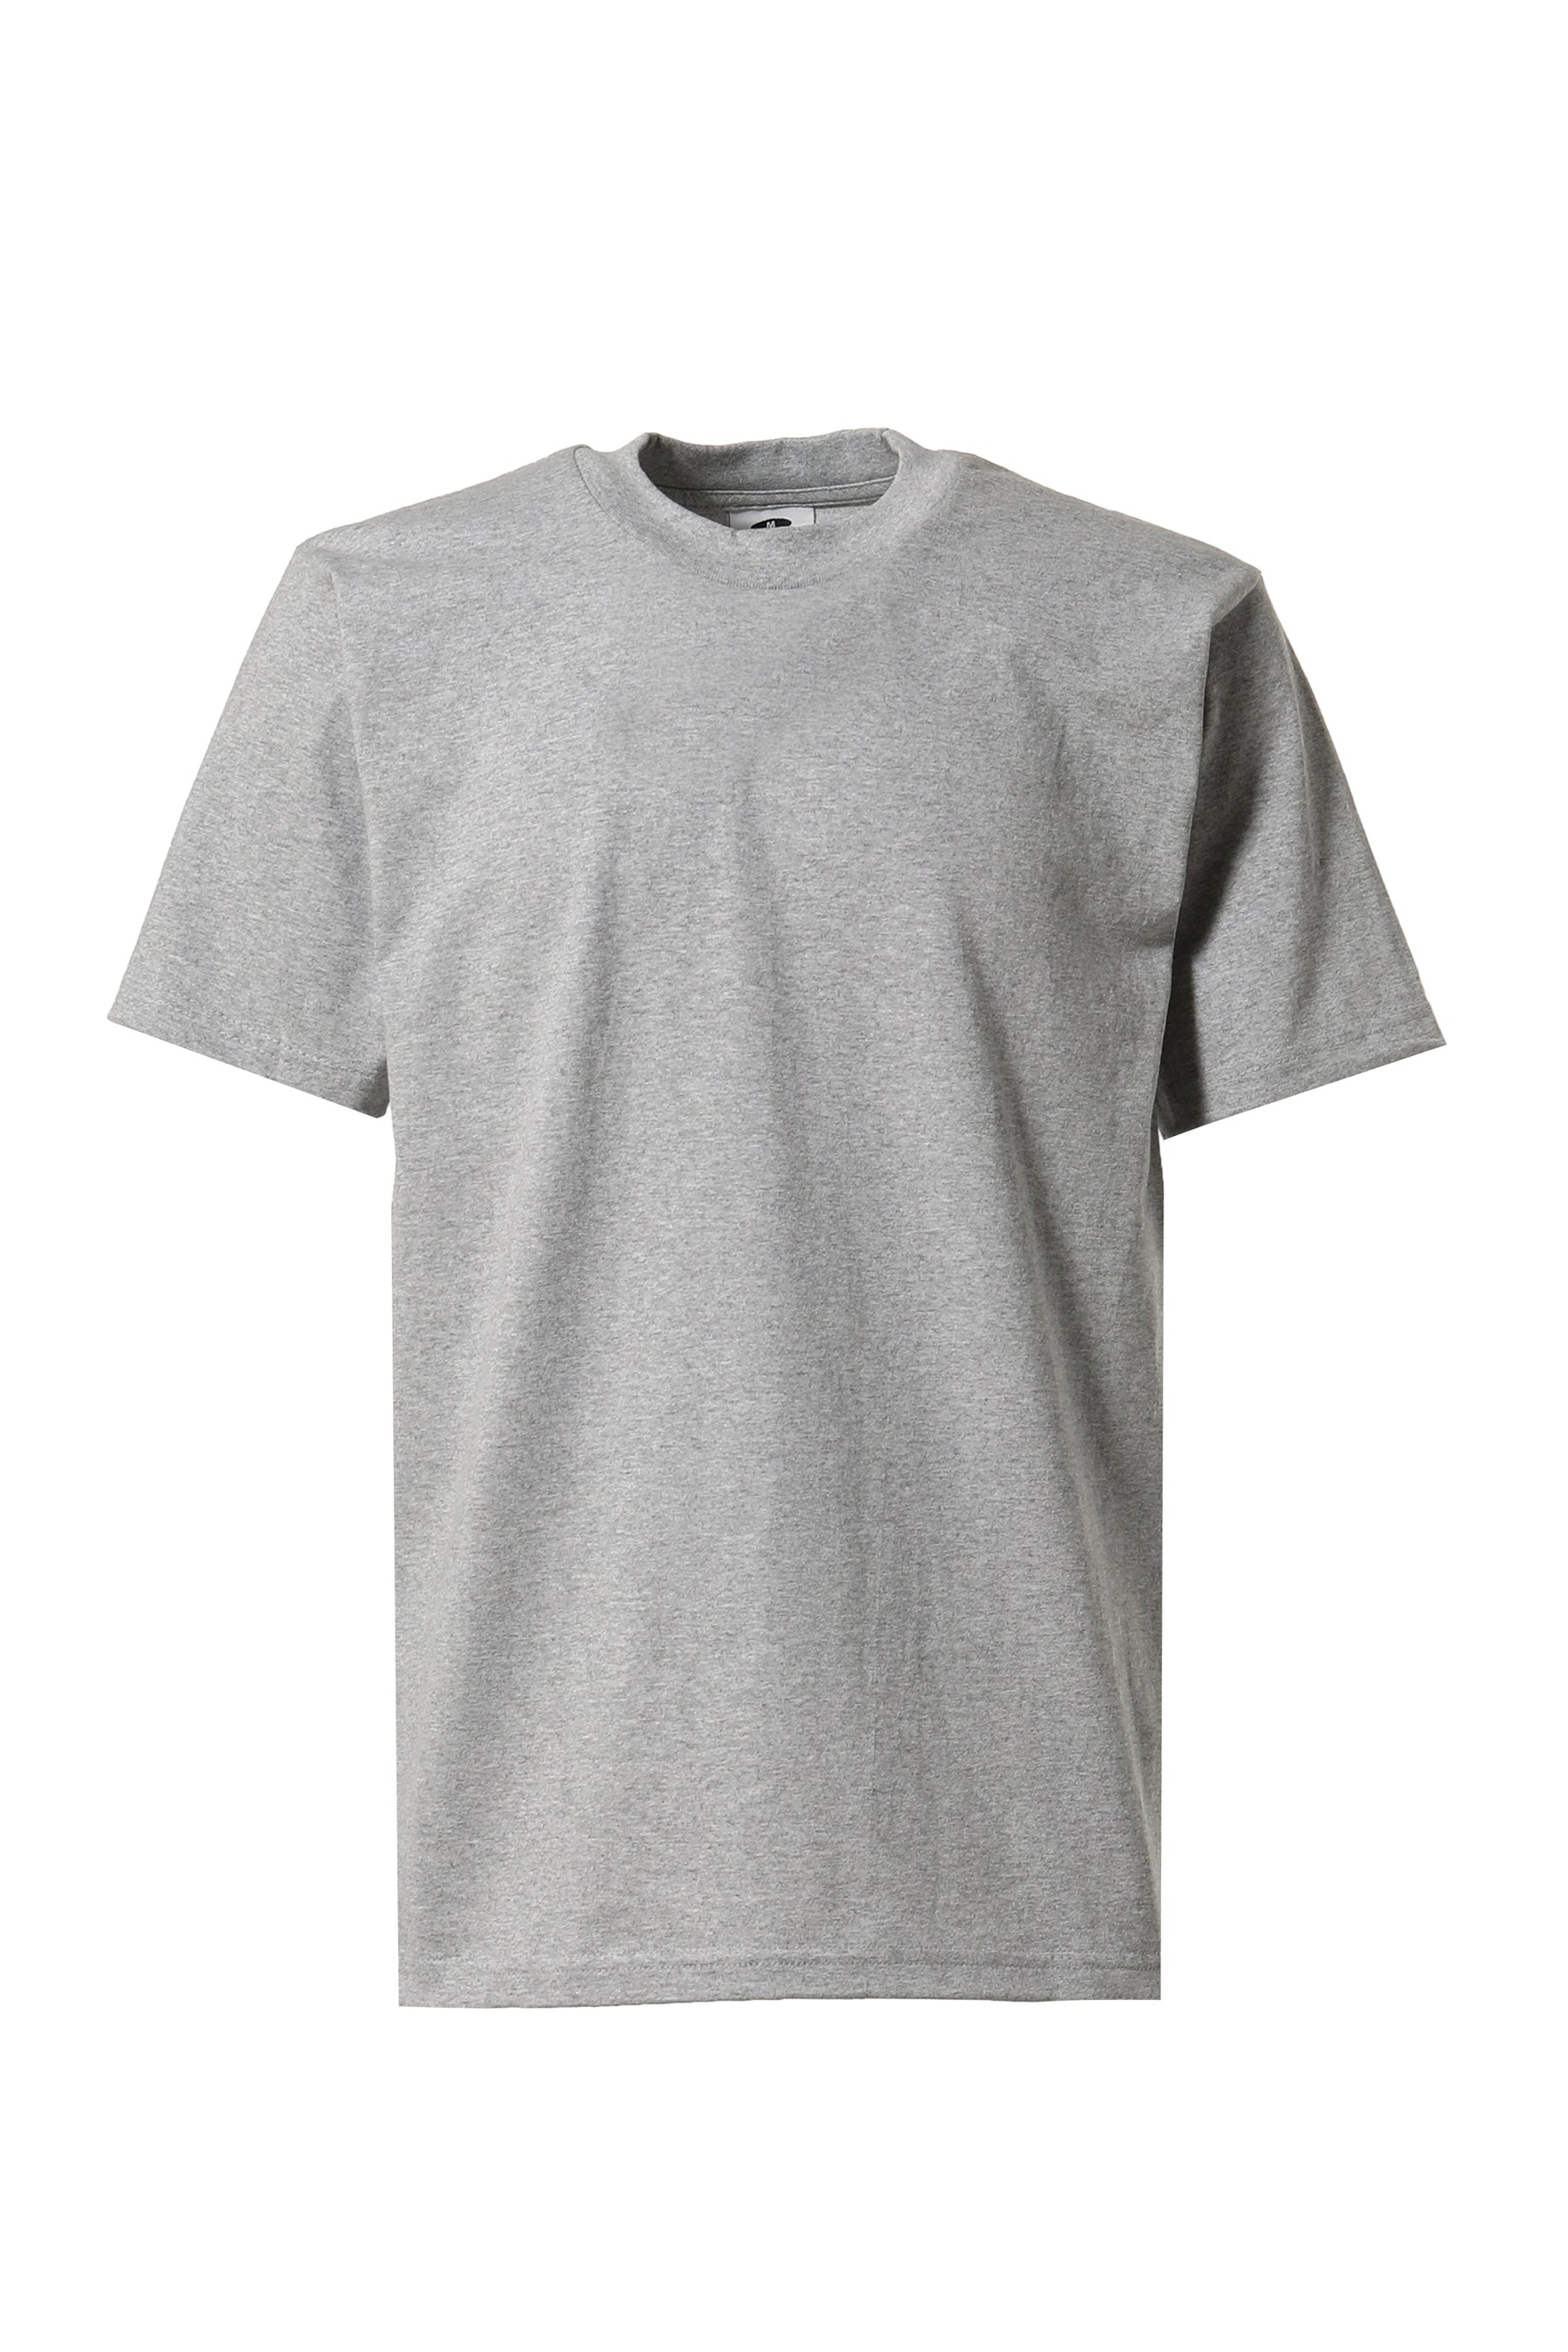 HEAVY WEIGHT CREWNECK T-SHIRT / GRY